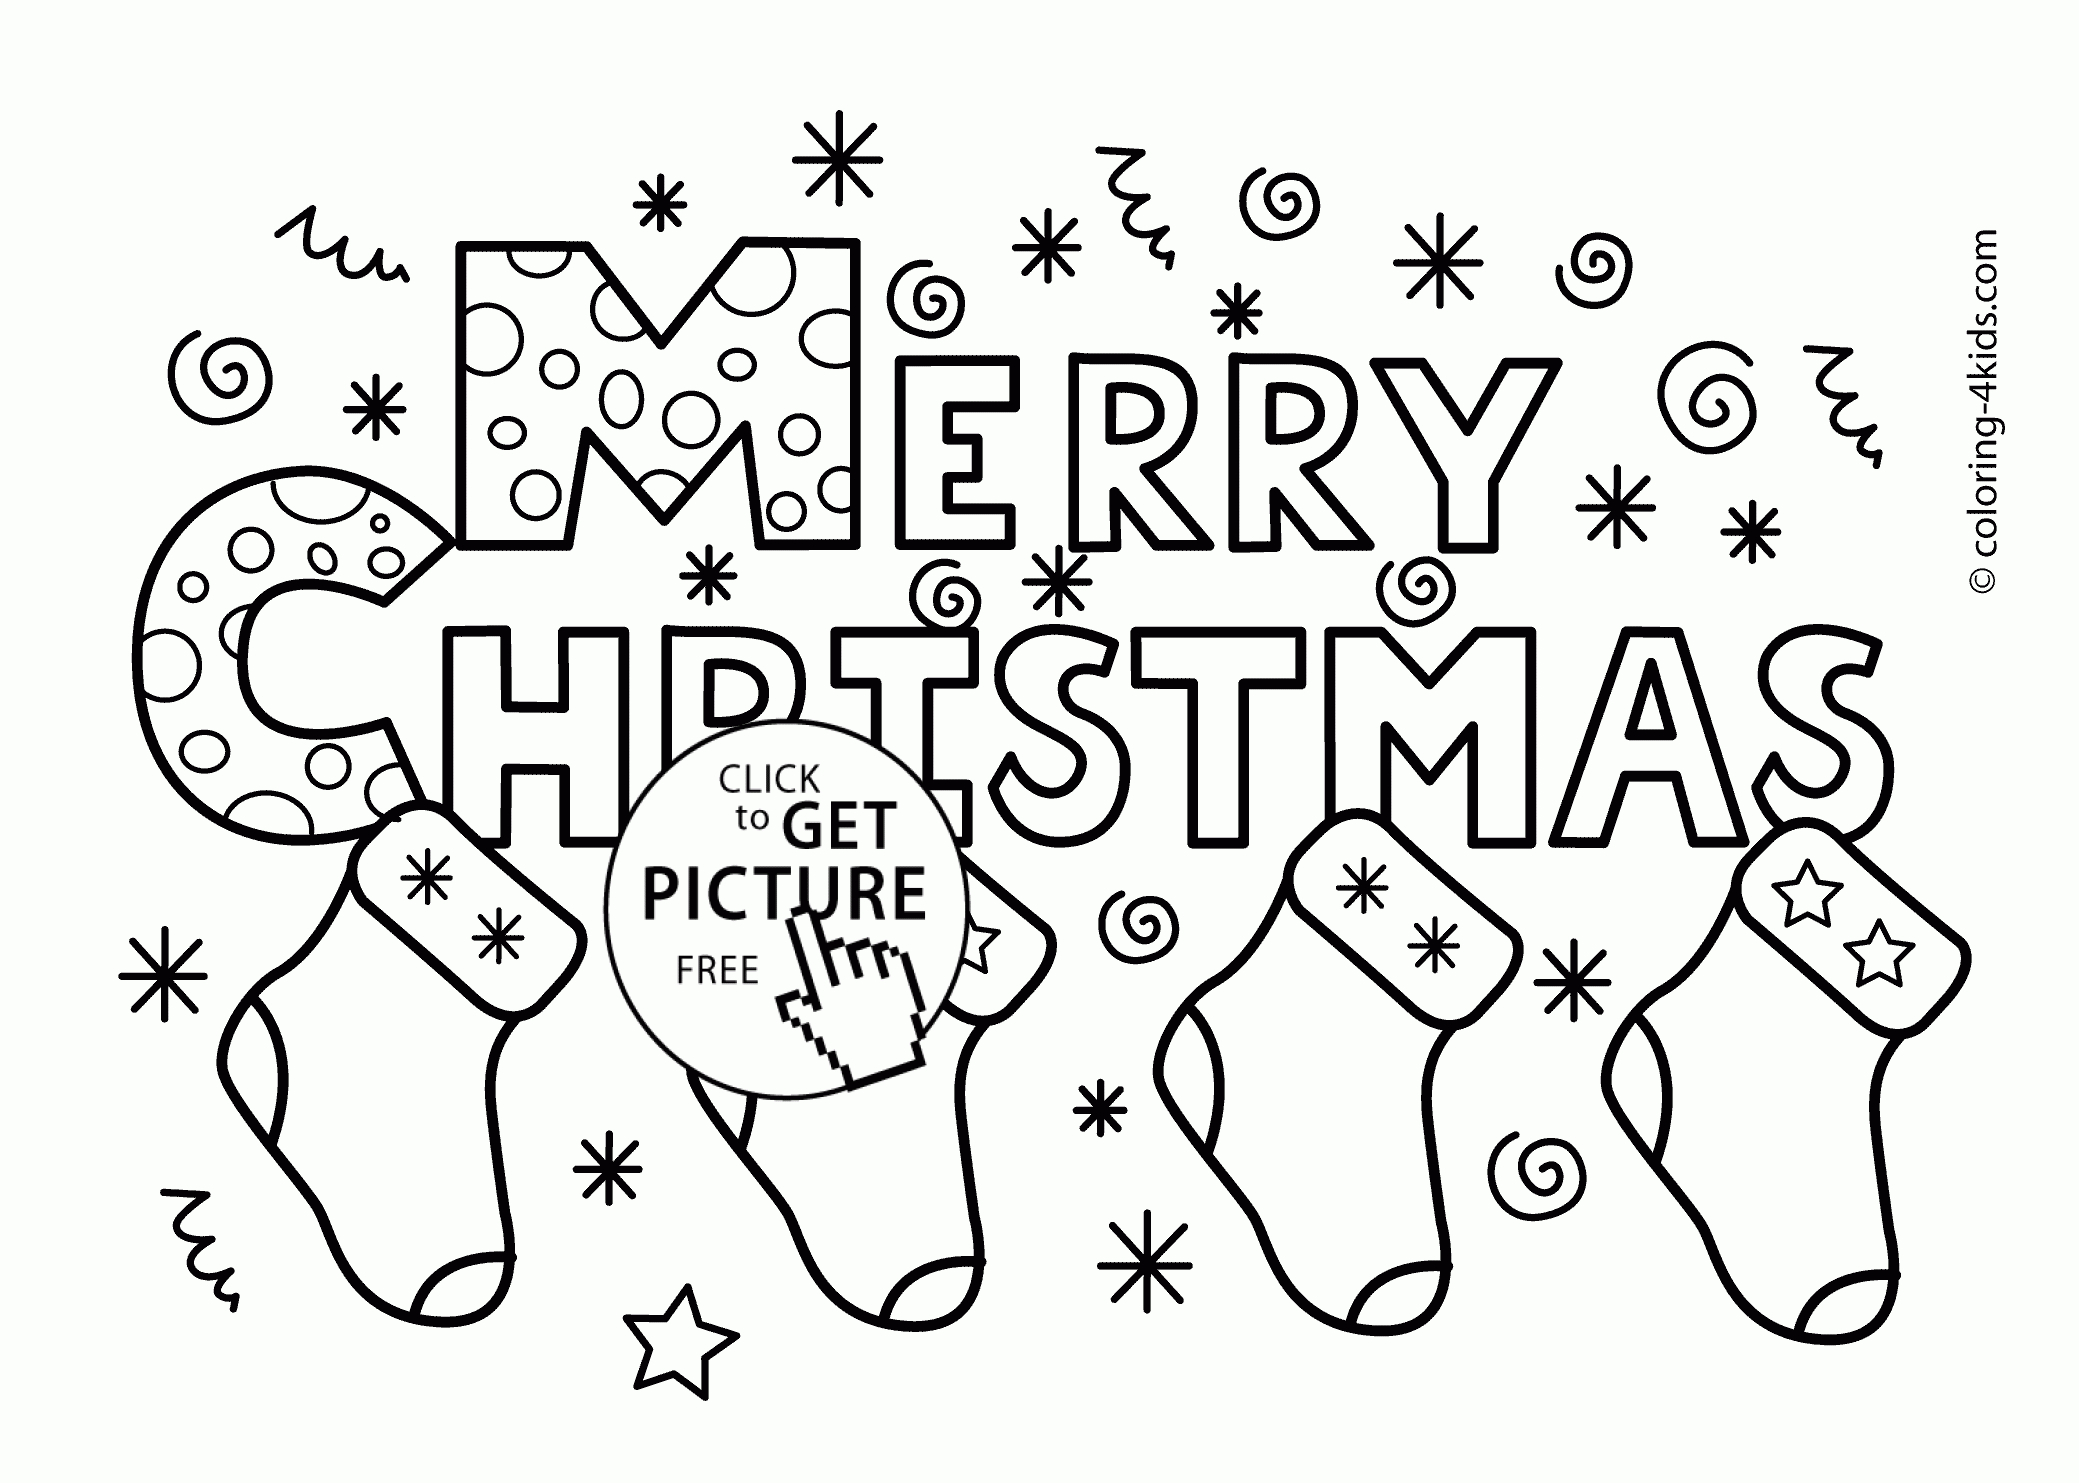 Merry Christmas Socks Coloring Pages For Kids, Printable Free - Free Printable Christmas Coloring Pages For Kids